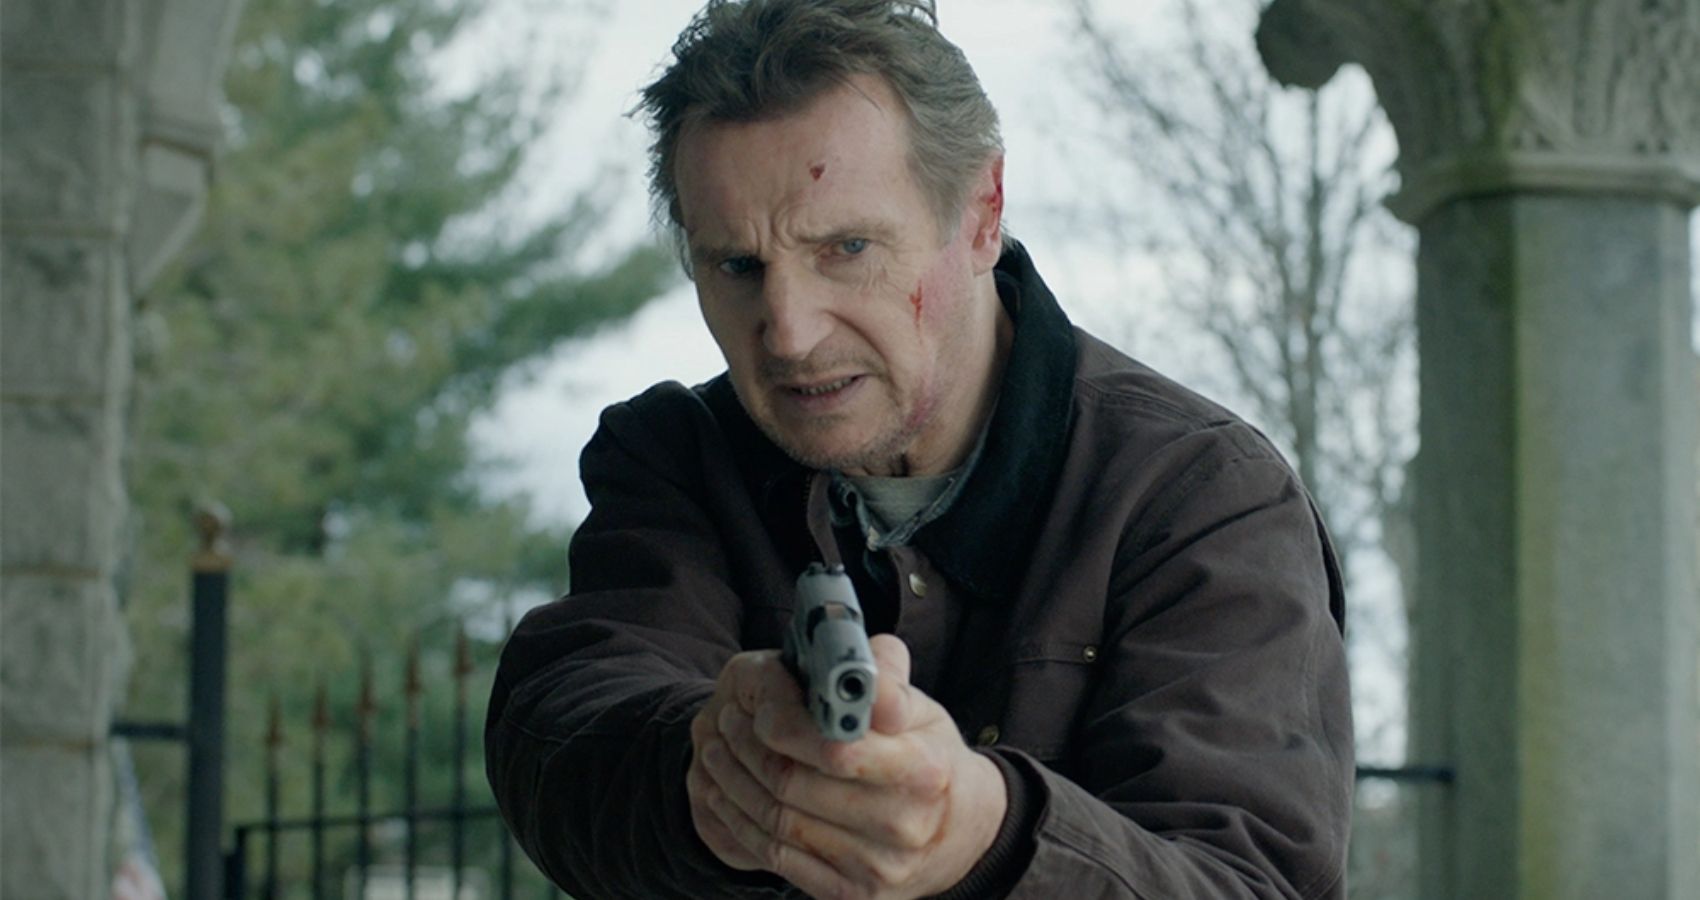 Blacklight Trailer Gives Liam Neeson the Chance to Do What He Does Best -  Quick Telecast